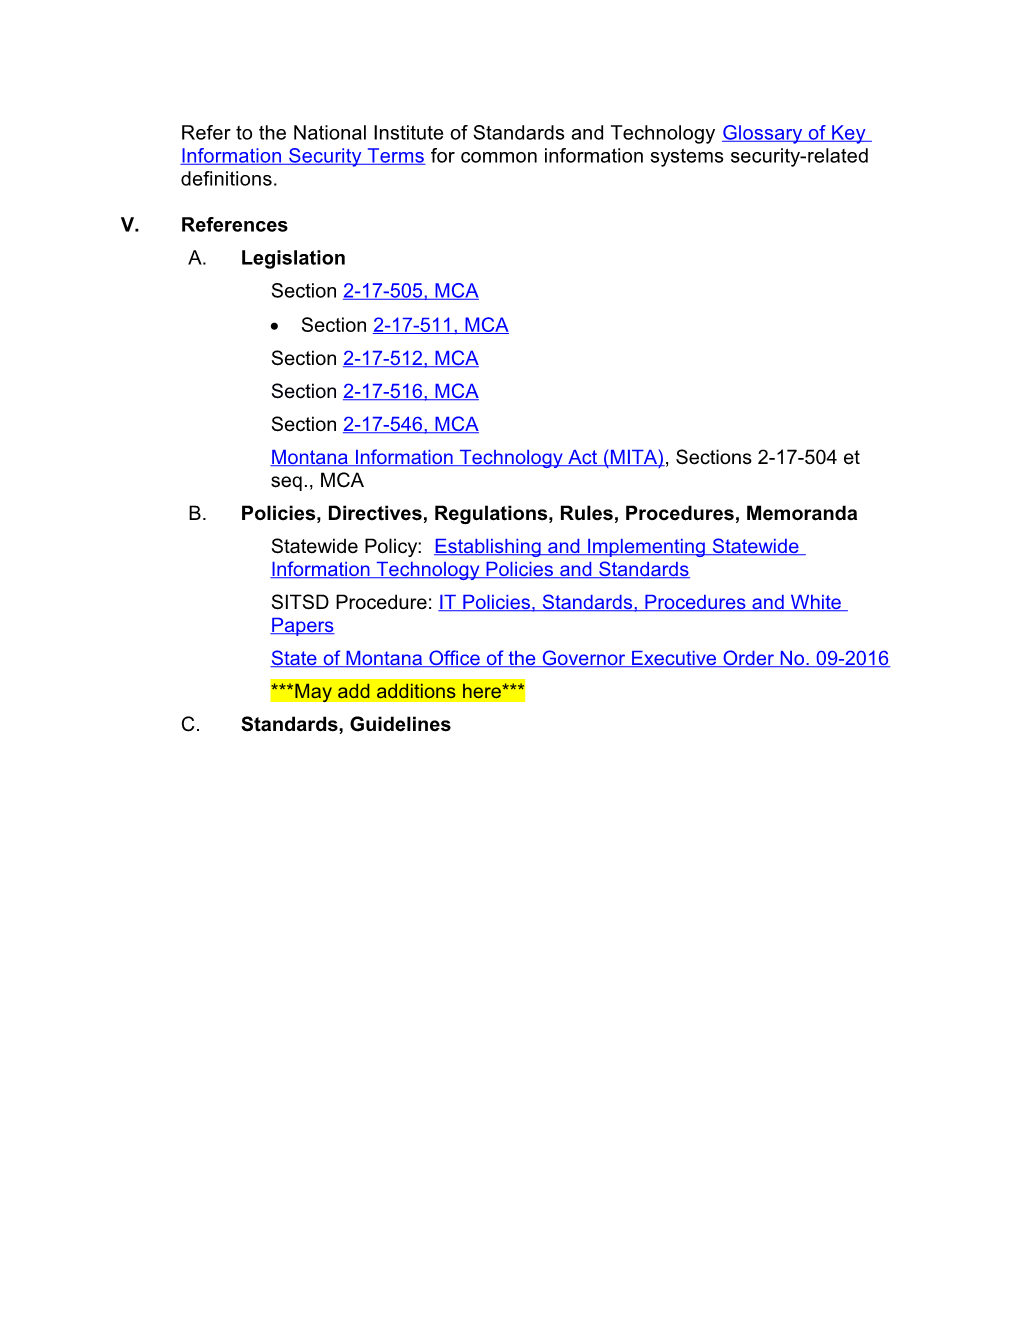 The Montana Information Technology Act (MITA), Sections 2-17-504 Et Seq., MCA, Assigns